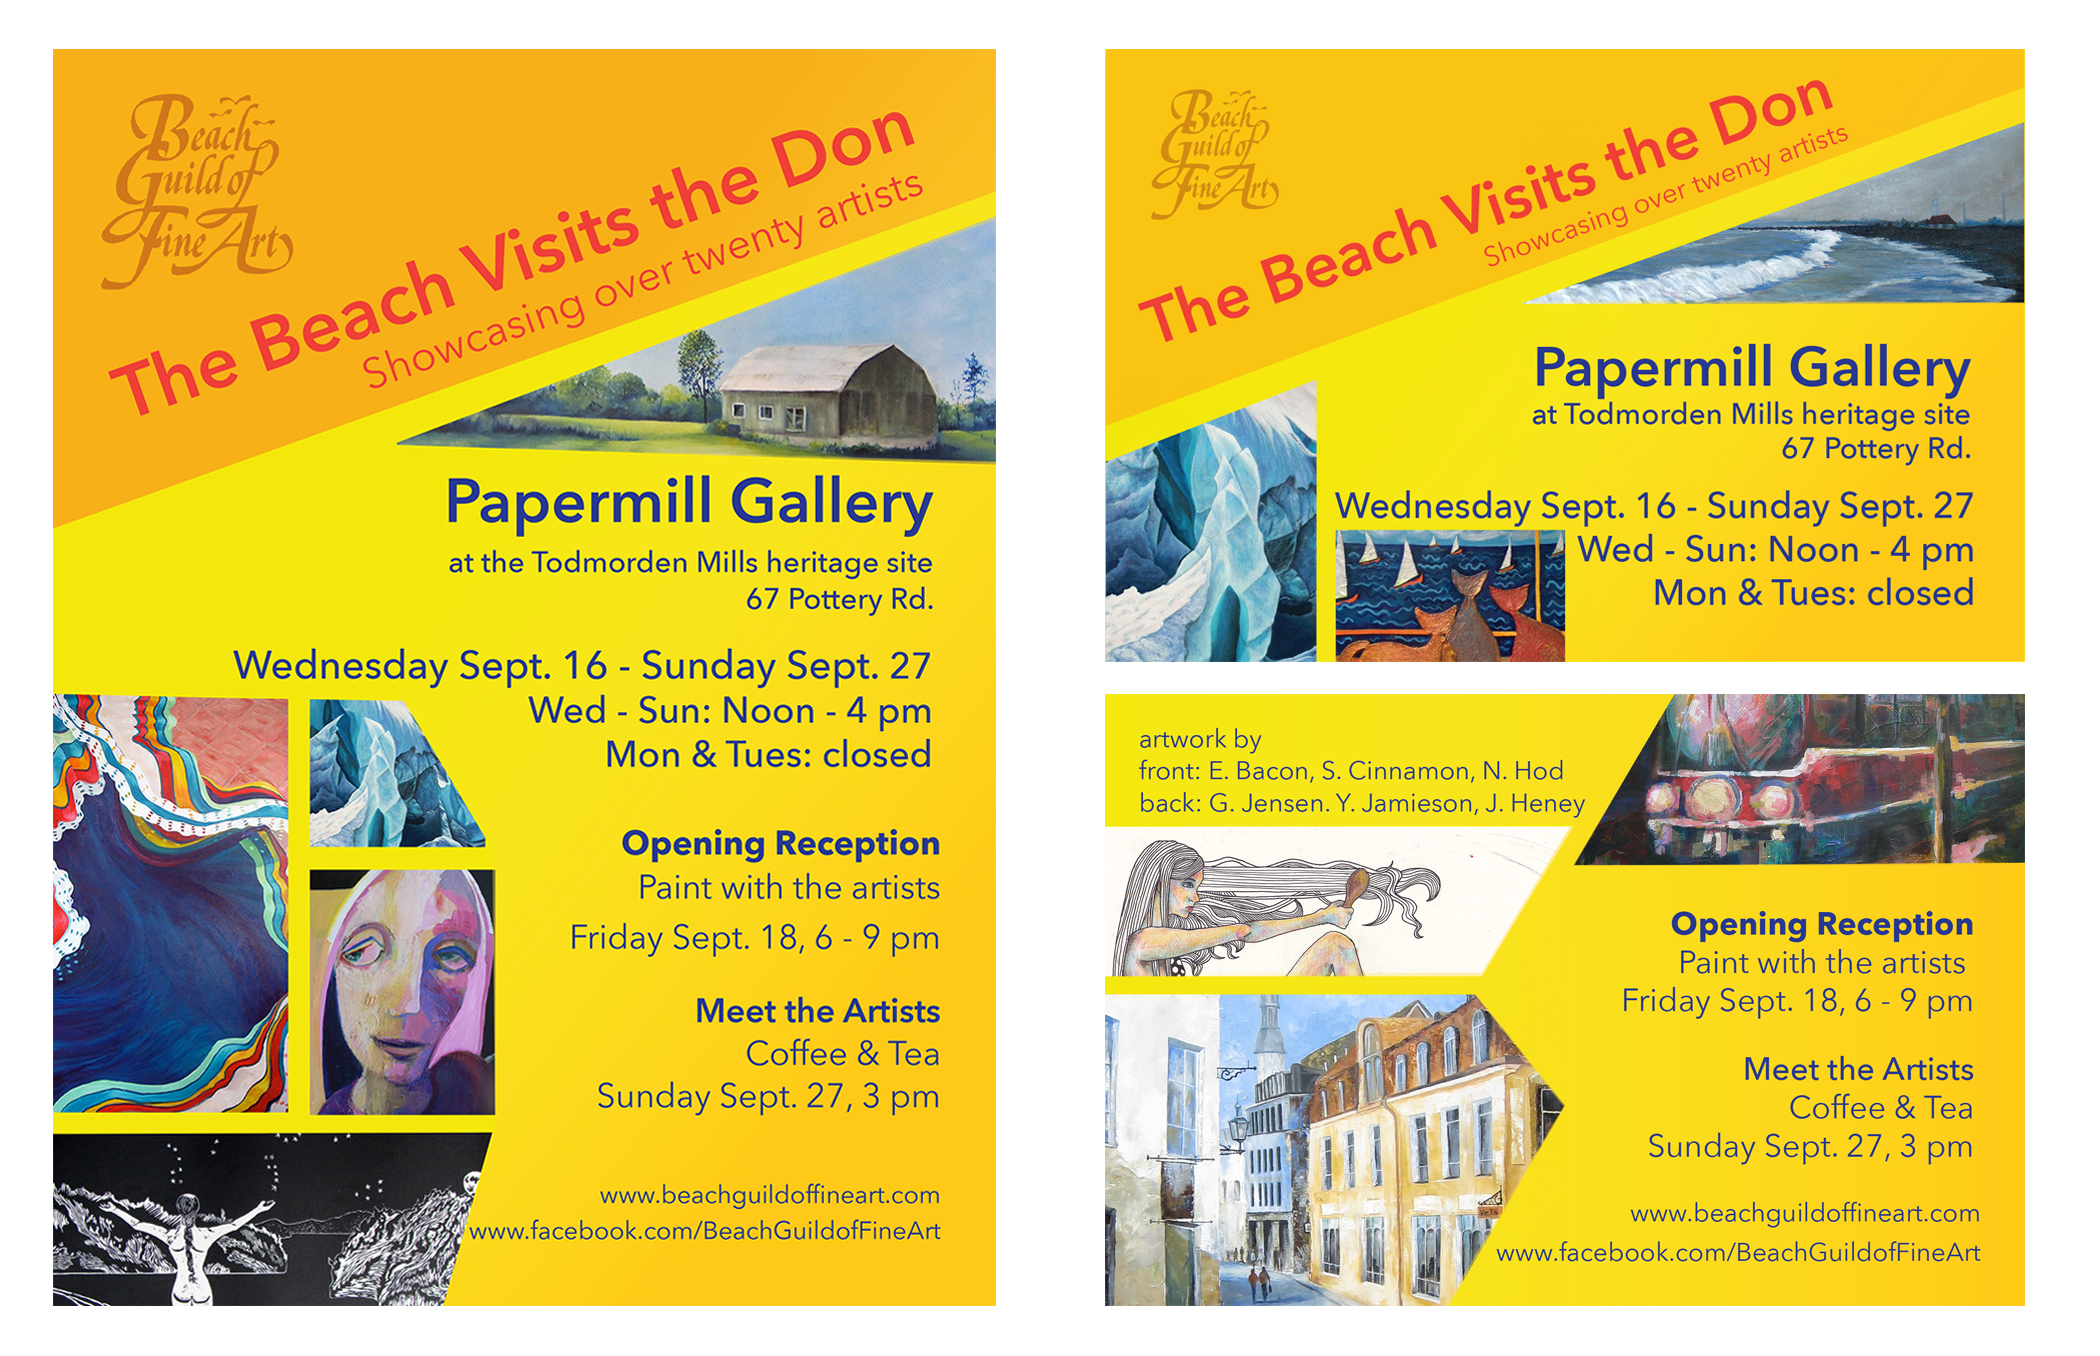  As part of her work with the Beach Guild of Fine Art Jordana does the graphic design for all of the guild's printed posters, postcards, flyers, and e-vites related to their art shows. 